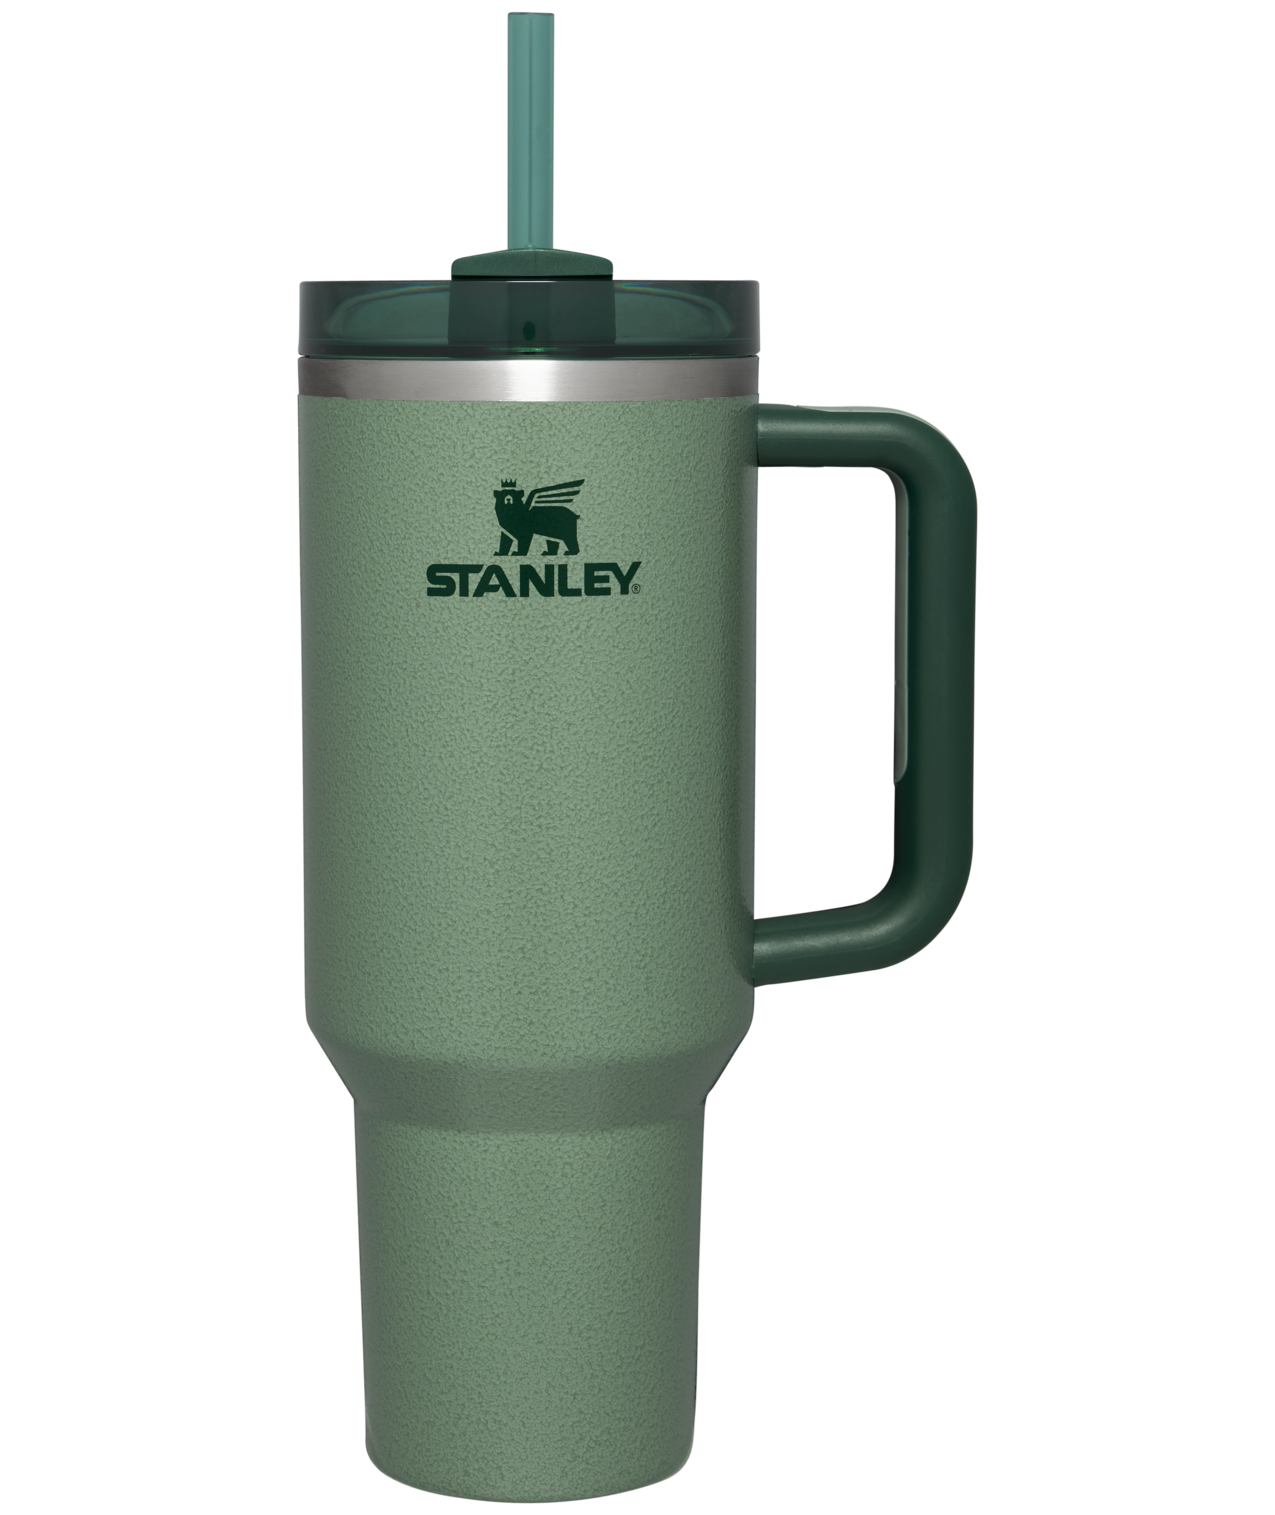 https://img-va.myshopline.com/image/store/1700619397492/B2B-Web-PNG-The-Quencher-H2-O-FlowState-Tumbler-40OZ-Hammertone-Green-Front.png?w=1275&h=1515